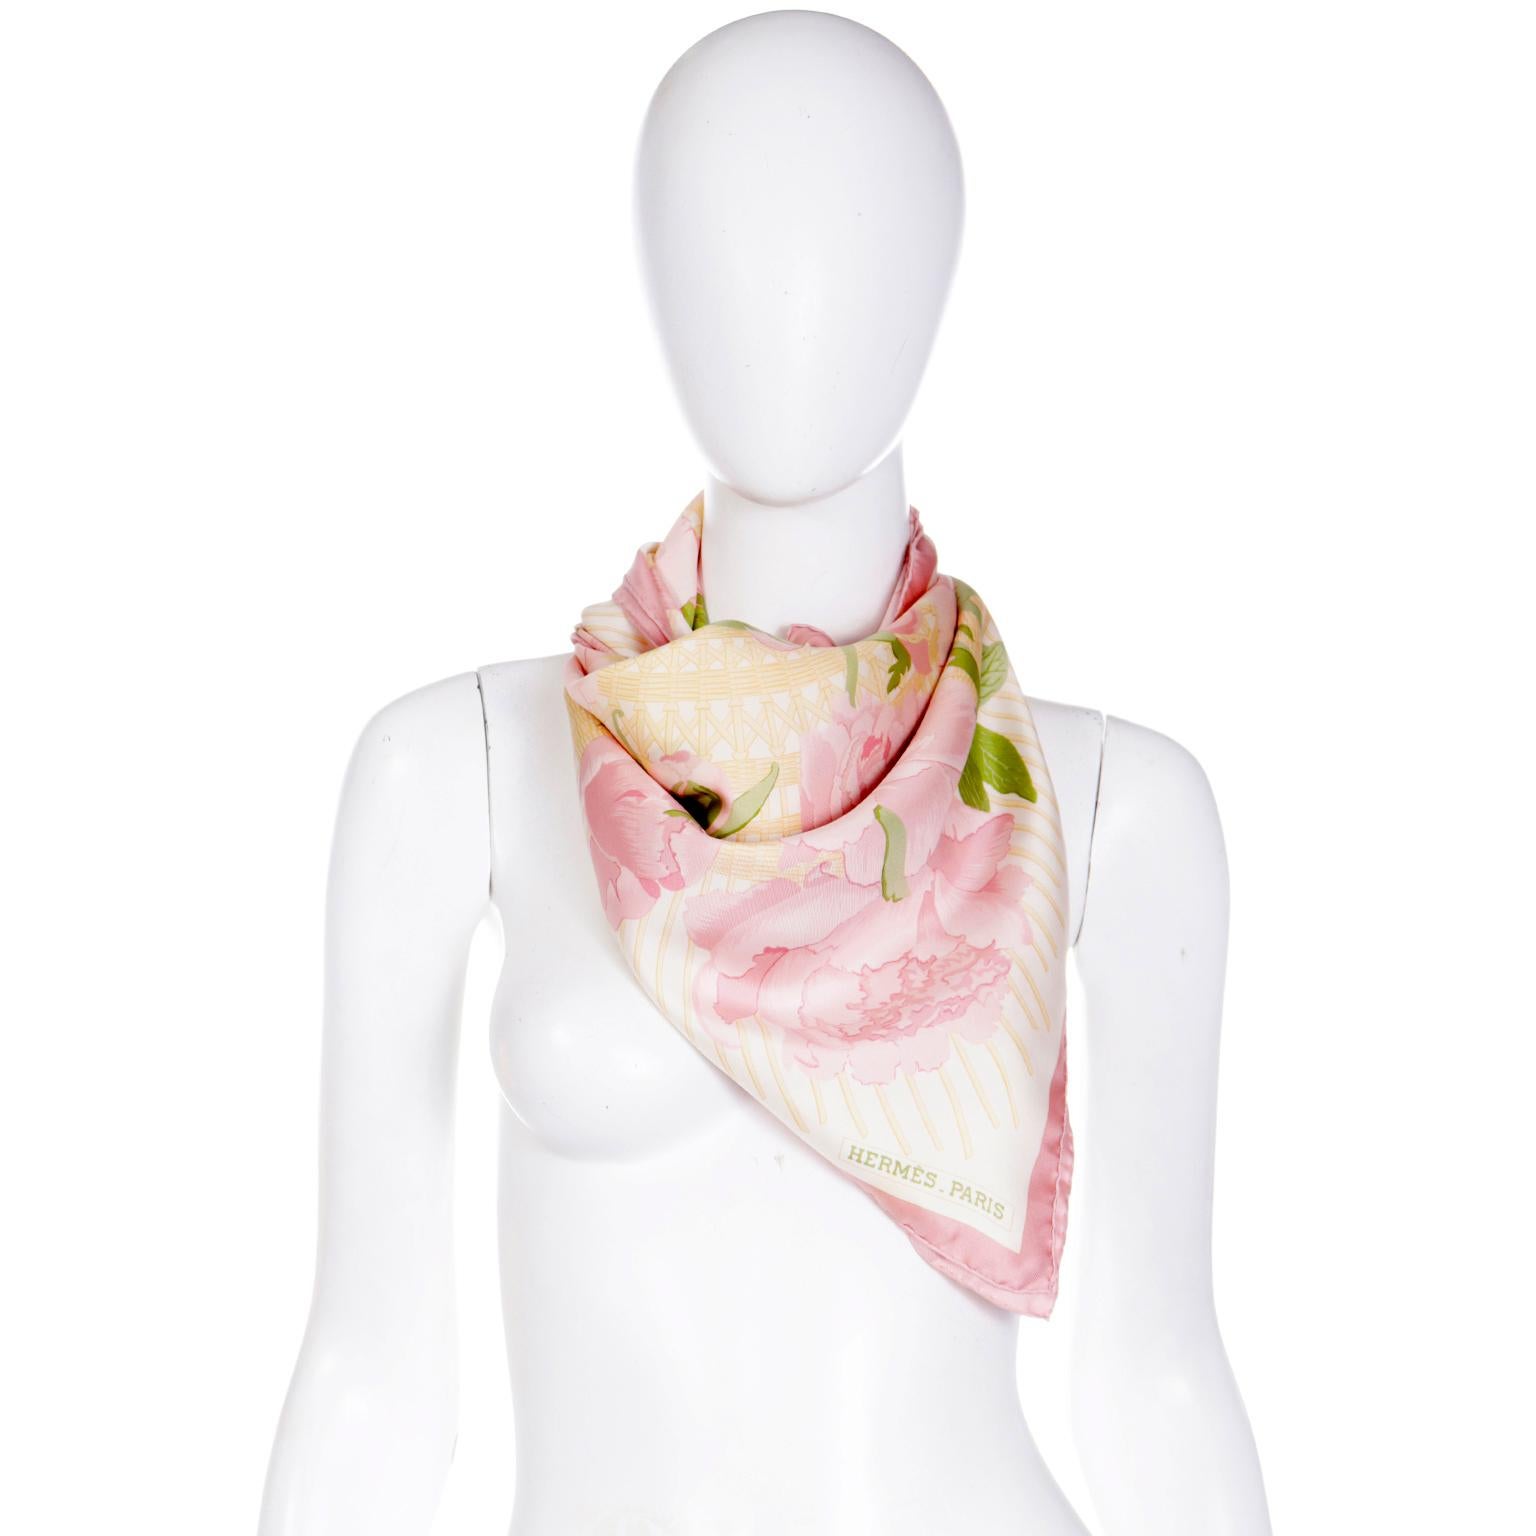 This lovely vintage Hermès scarf is titled Les Pivoines and the design features gorgeous large pink peonies on a pale yellow woven pattern background. Designed by Christiane Vauzelles in 1978, this scarf was released in a variety of colorways and we